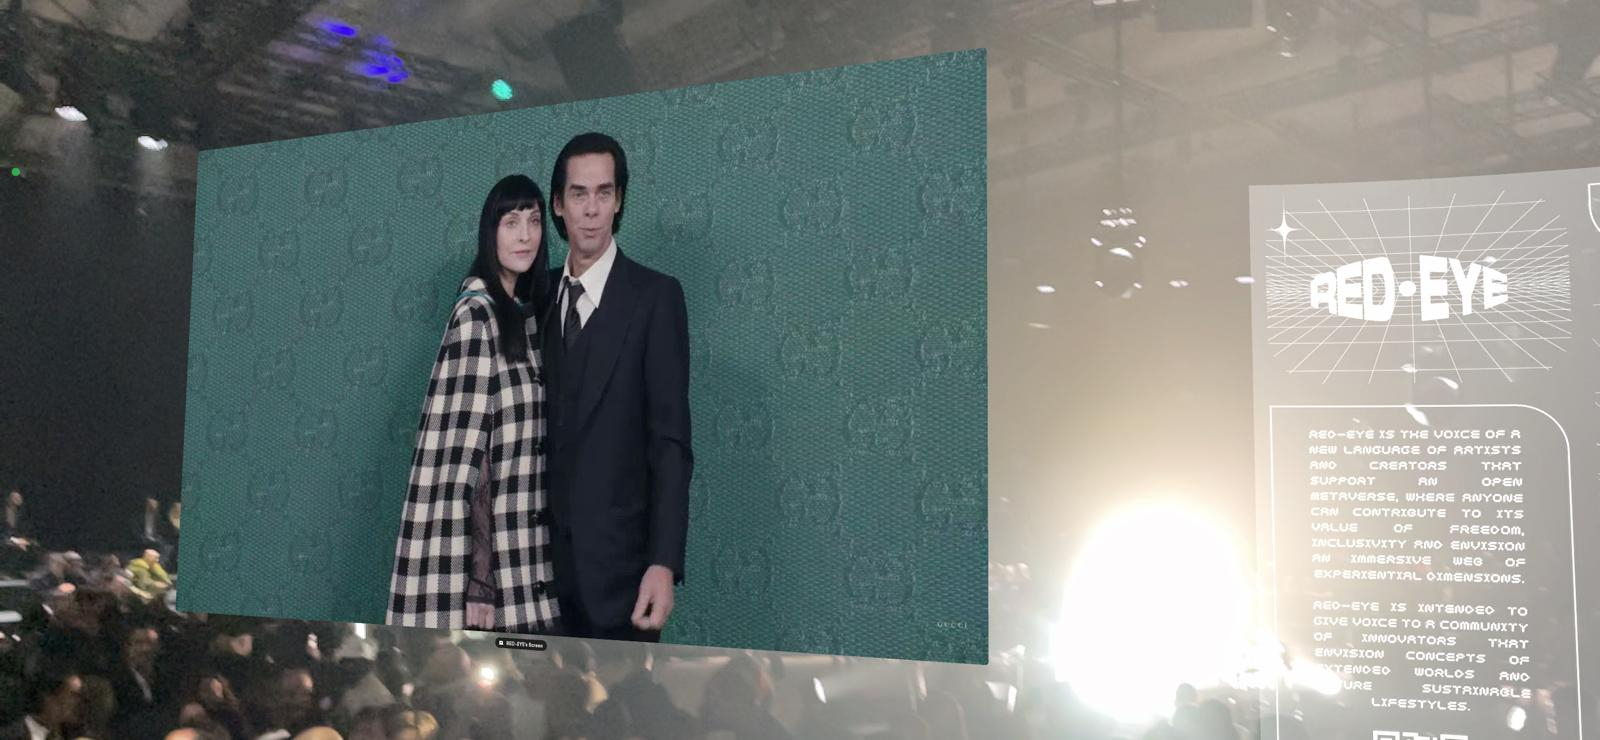 Nick Cave in Augmented Reality at the GUCCI venue, while waiting for the show to start